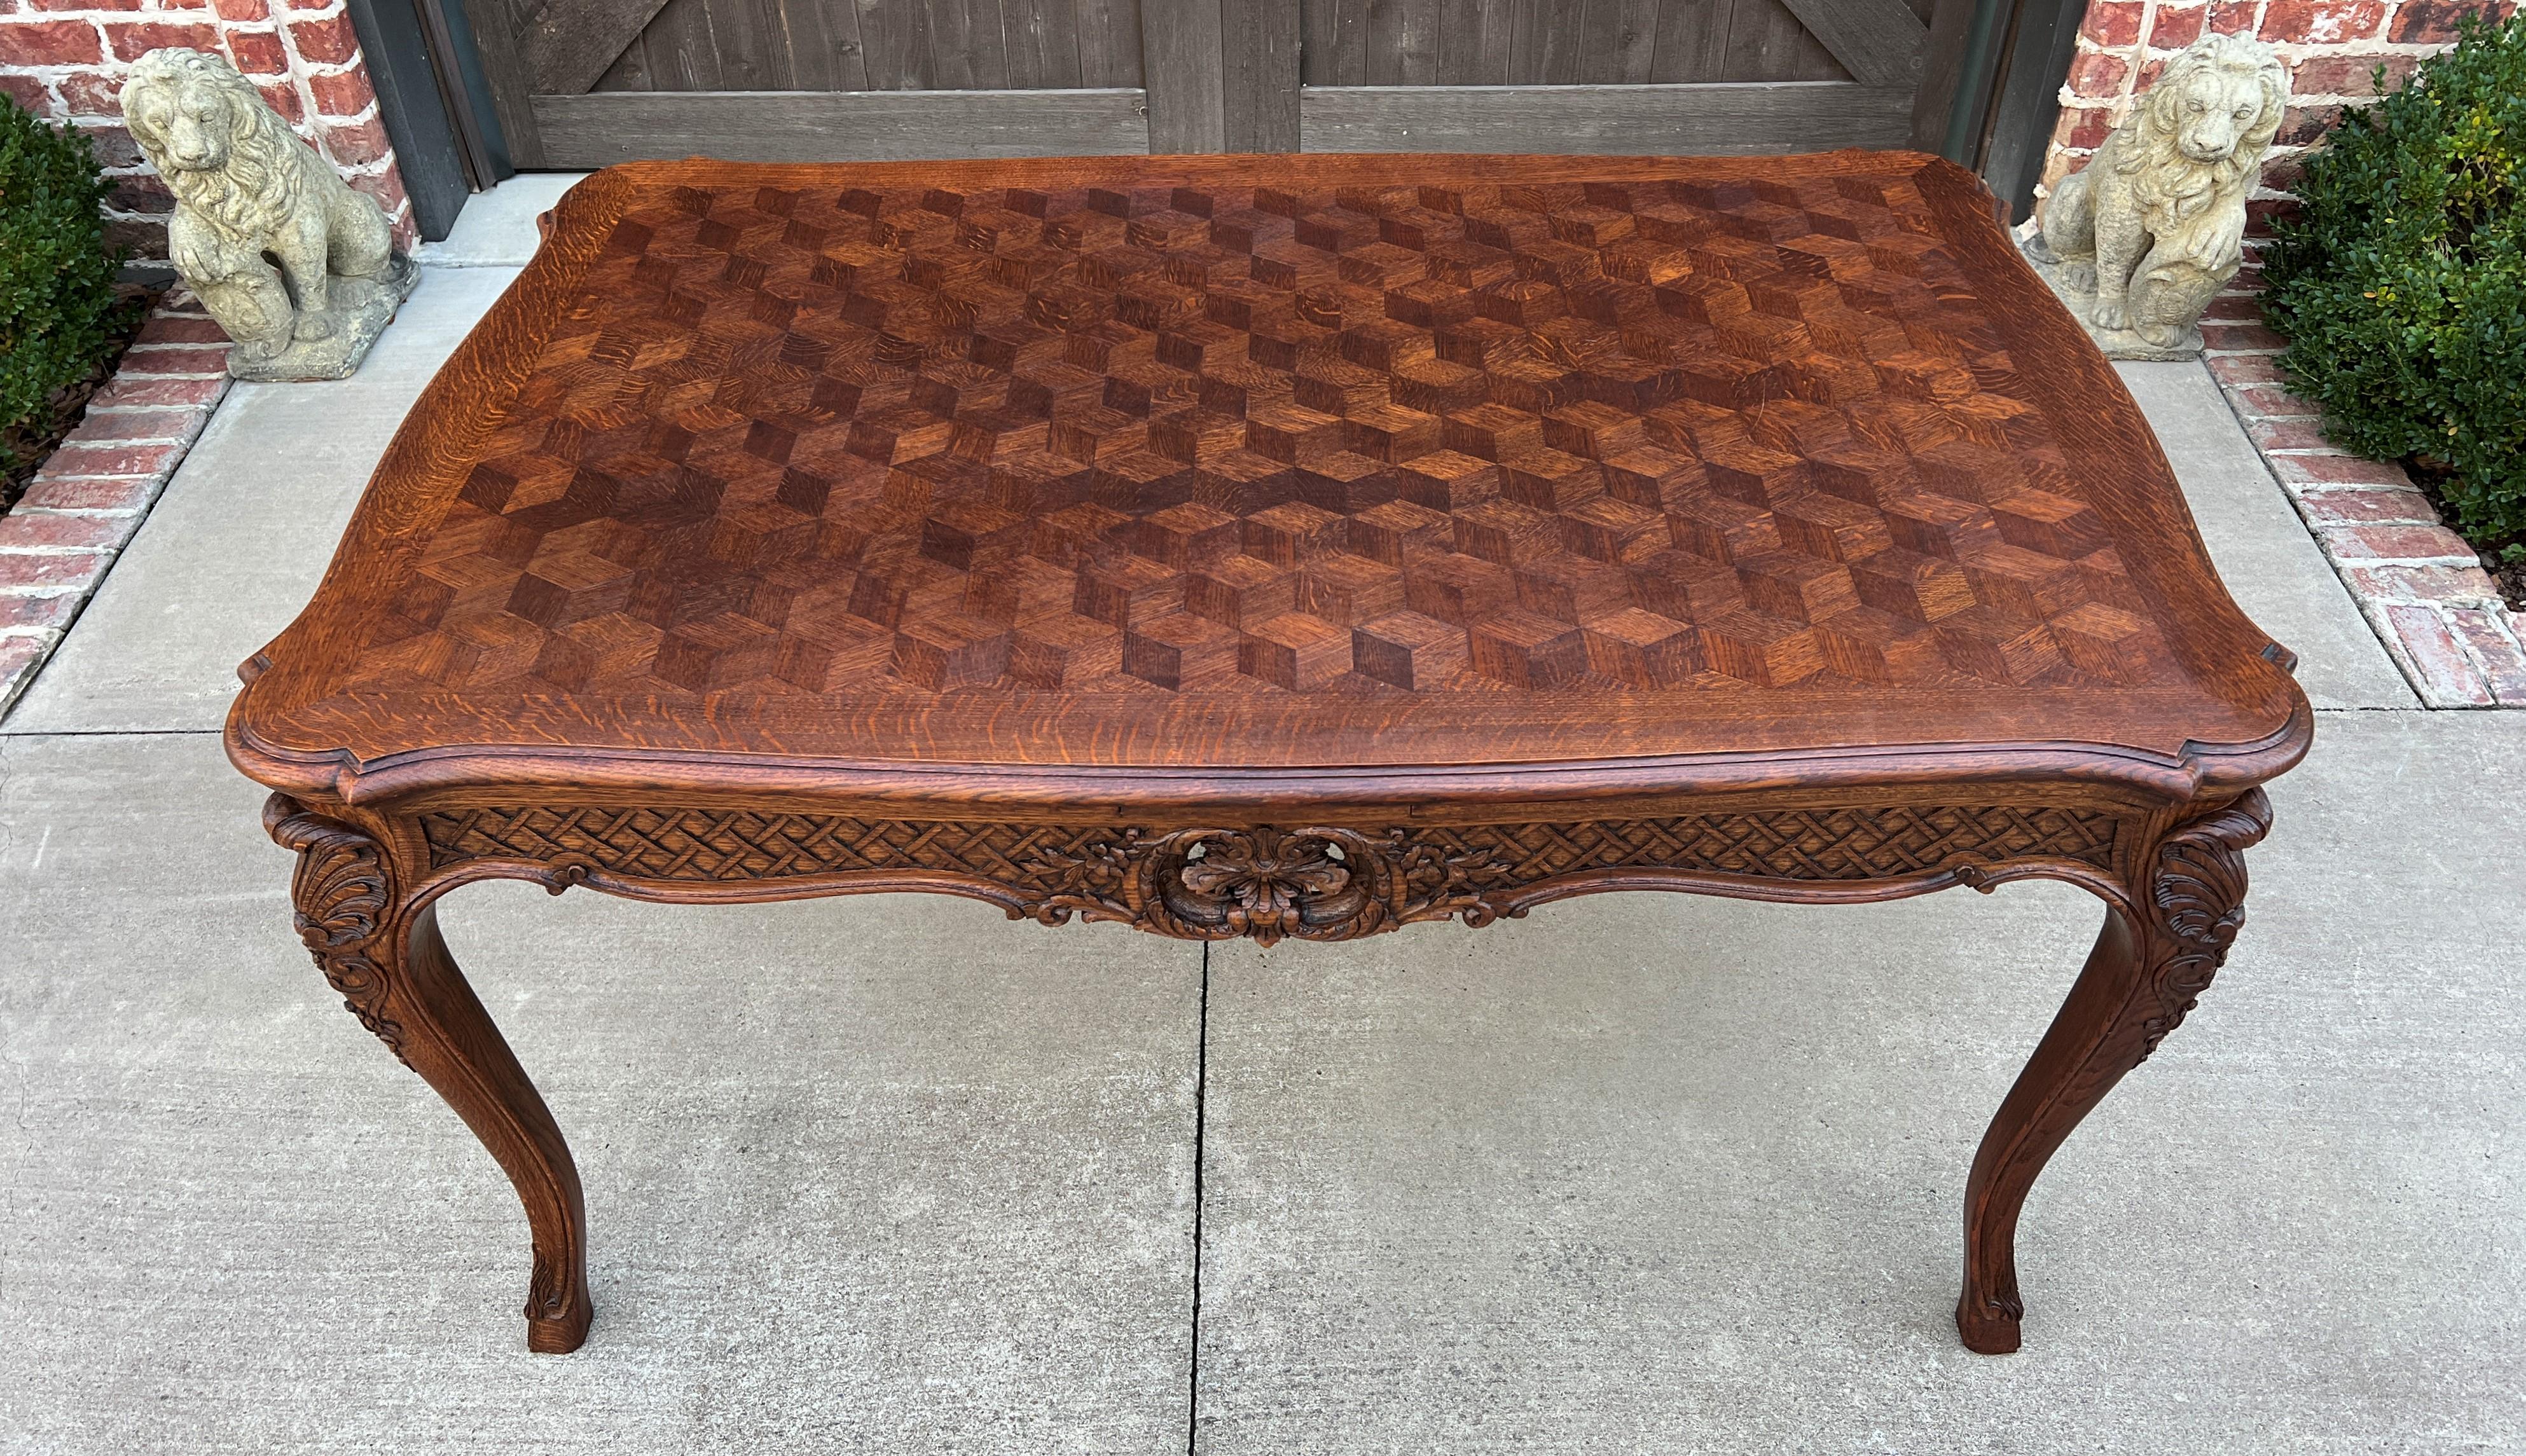 Antique French Table Dining Breakfast Table Desk Draw Leaf Carved Oak Parquet In Good Condition For Sale In Tyler, TX